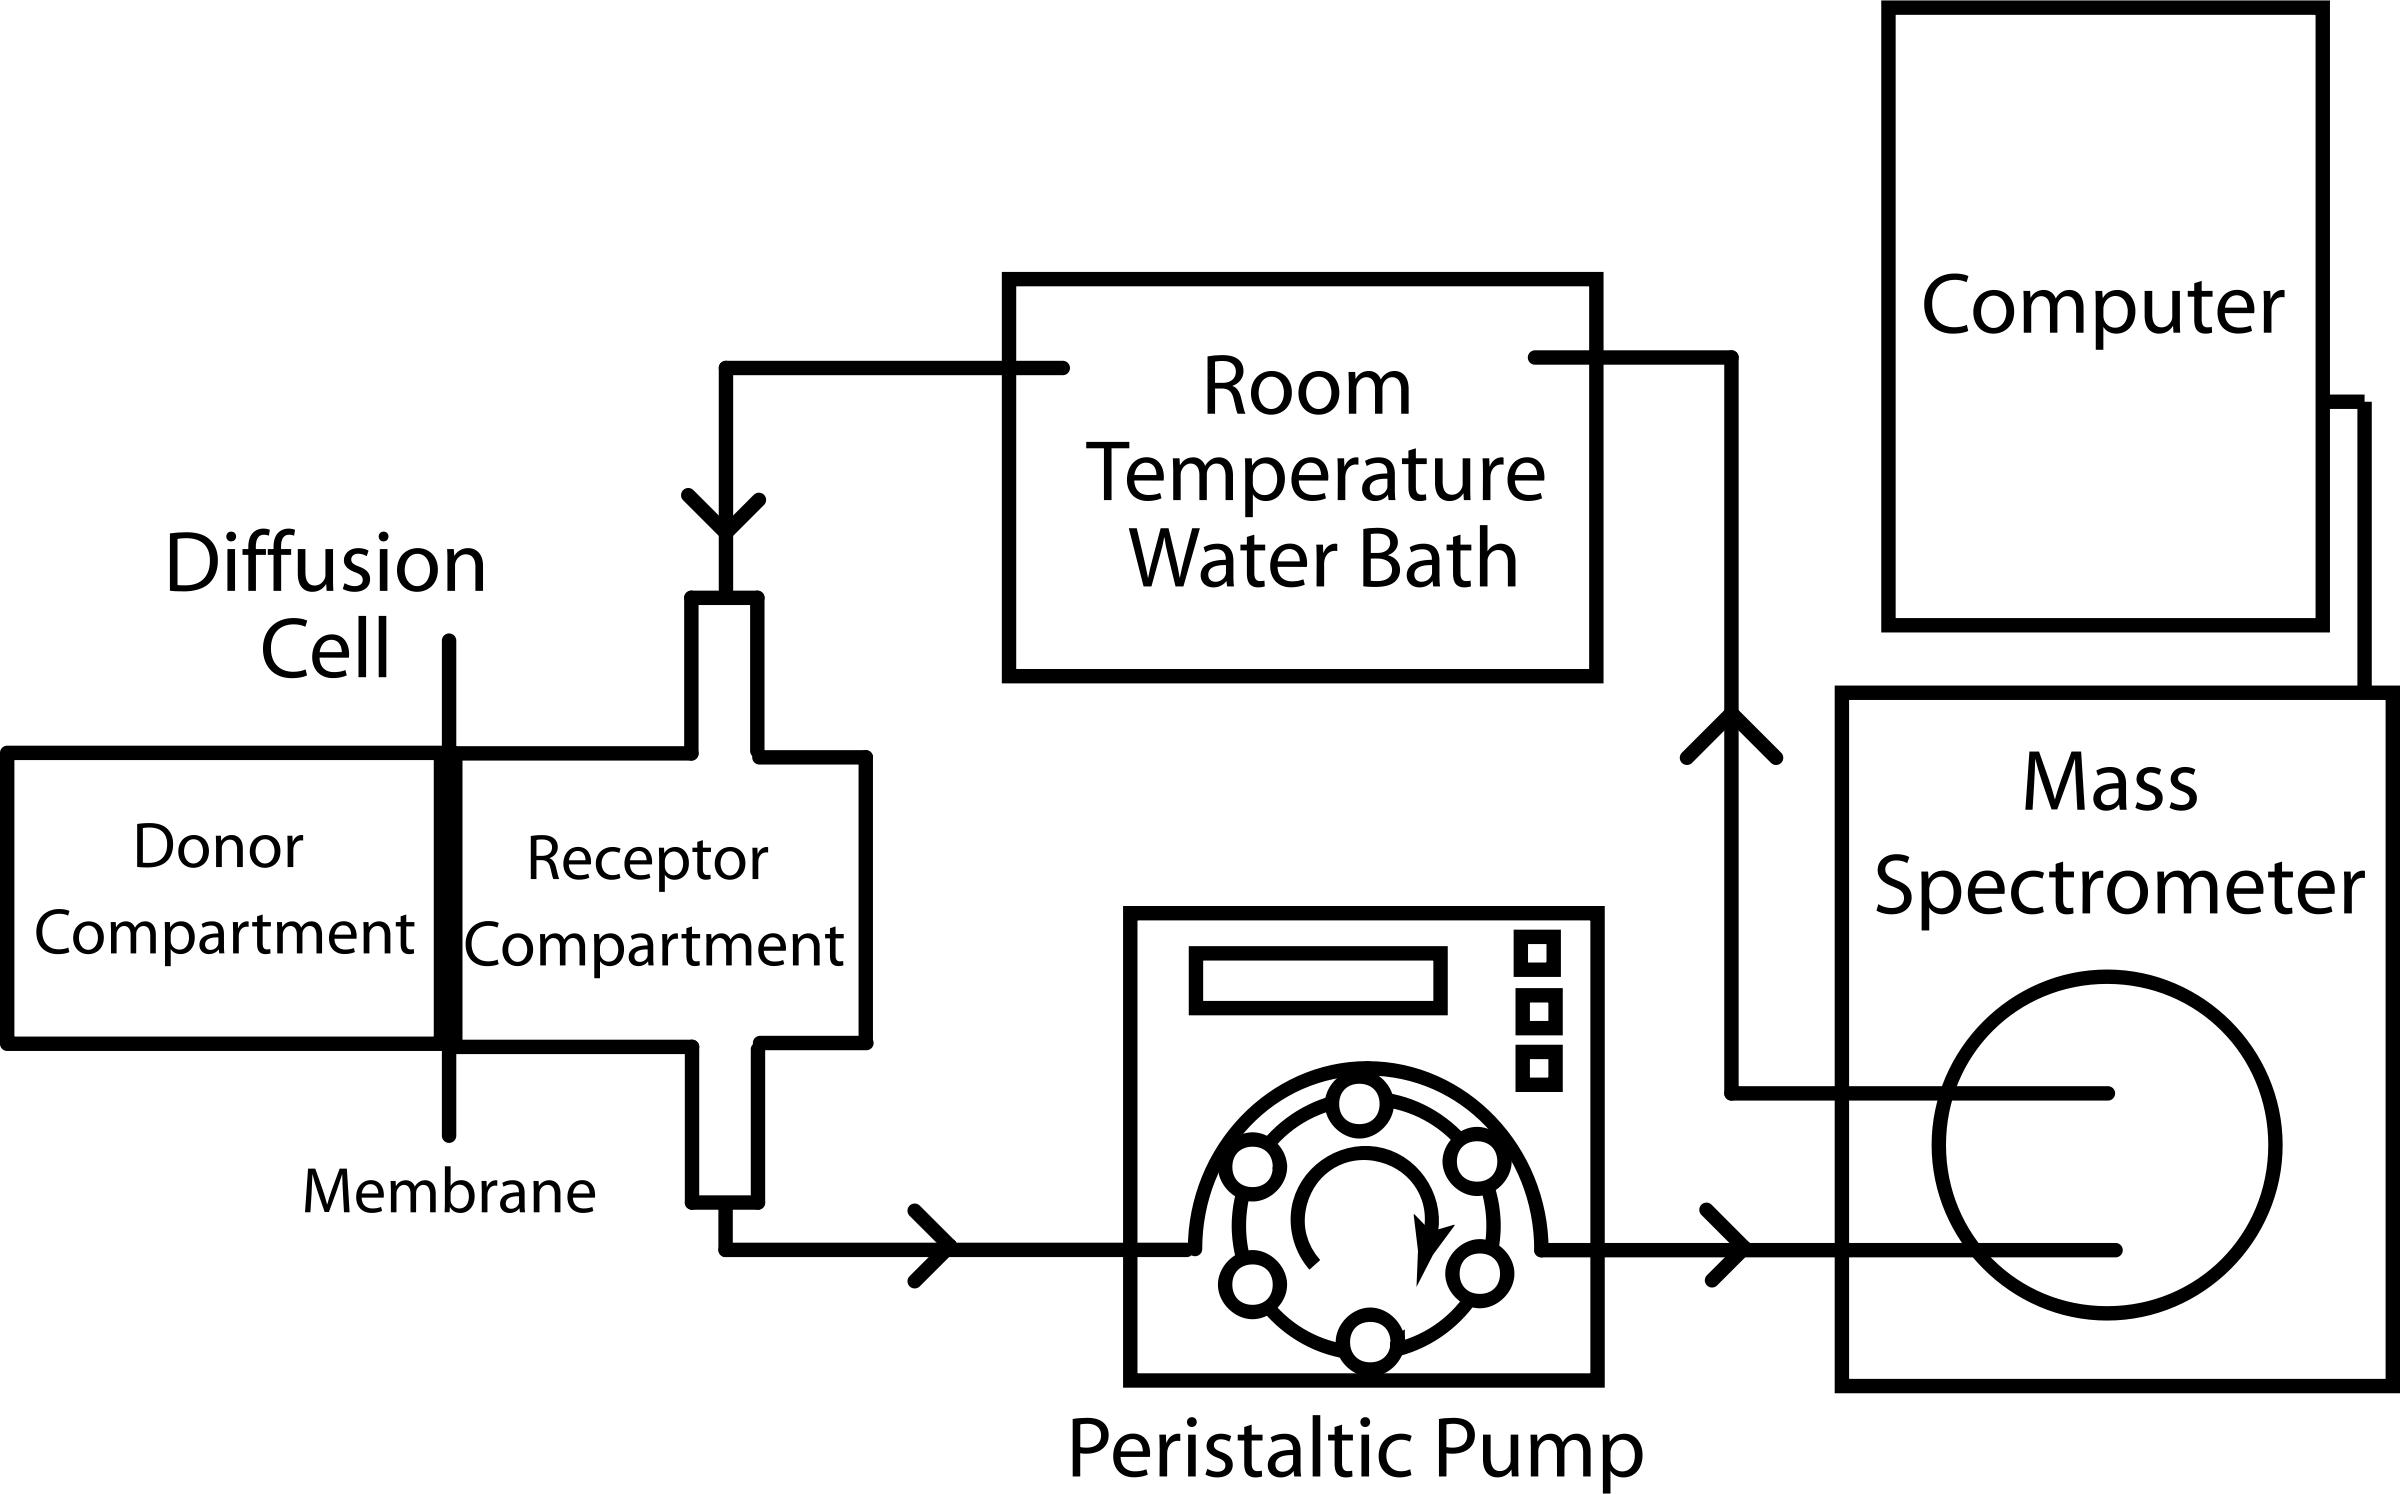 Diffusion and Permeability Measurement Apparatus- Mass Spectrometer png